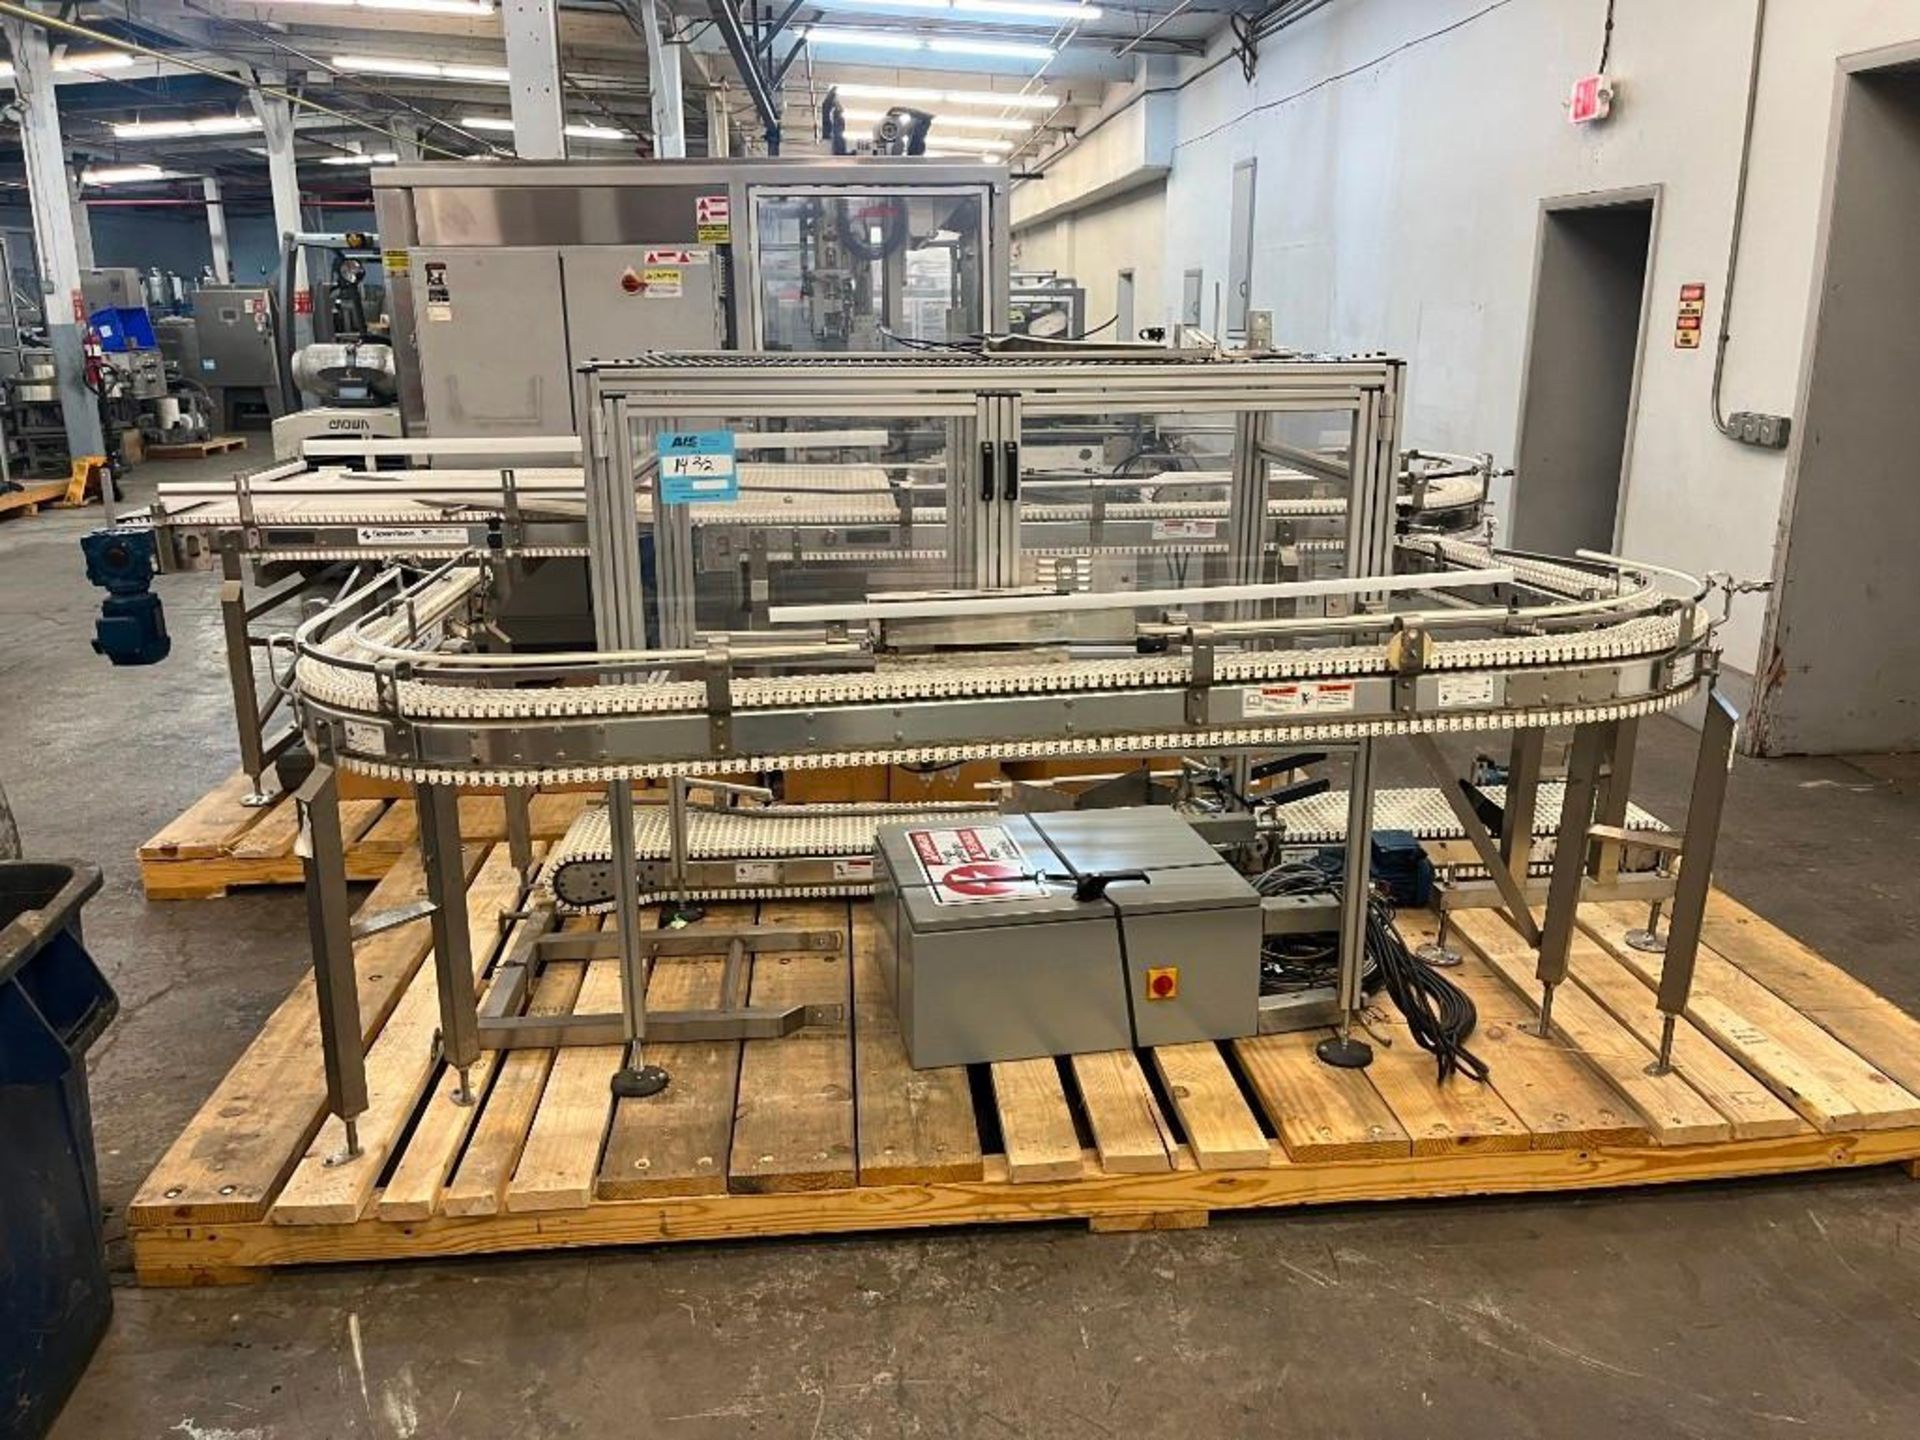 Spantech Flexlink Conveyor System and Linear Accumulation Table, S/N: 2254000325. Stainless steel co